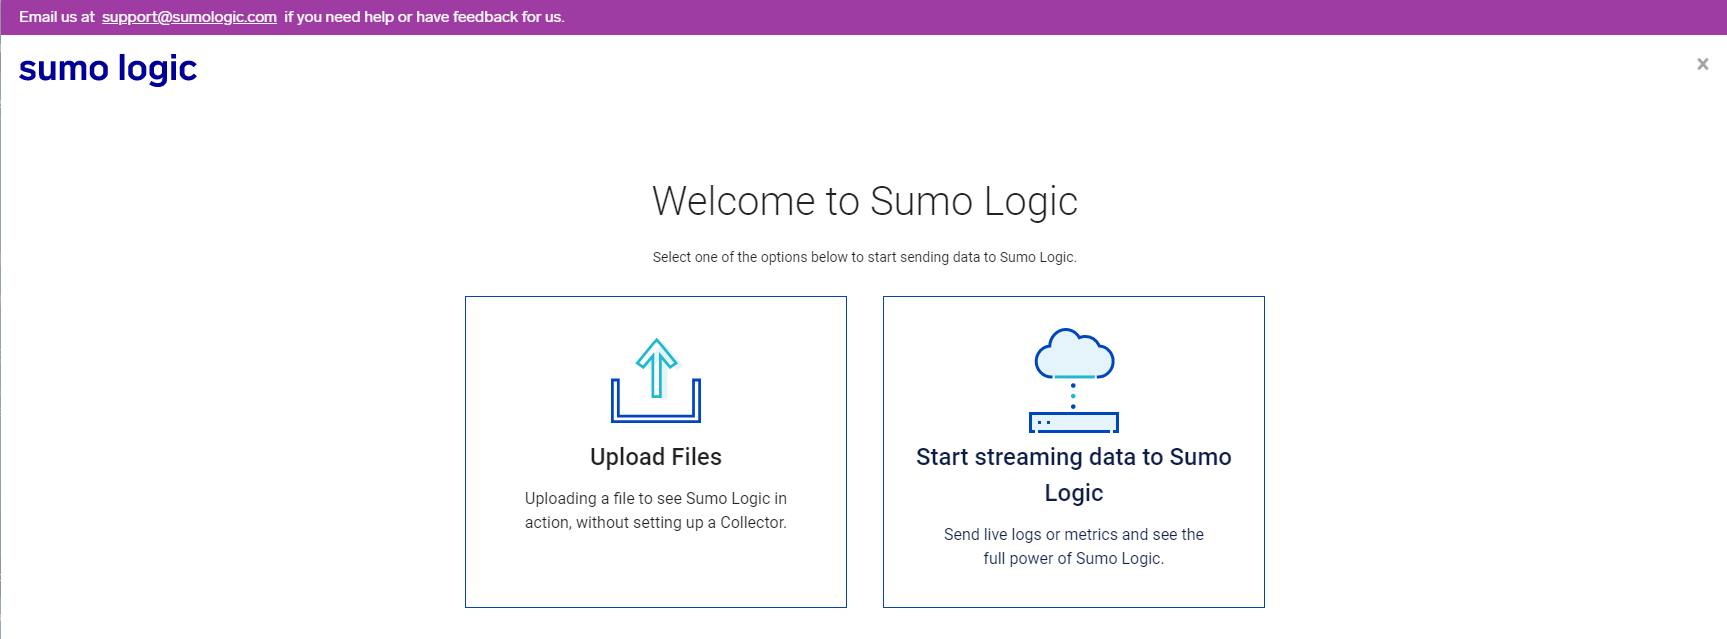 Click on Start streaming data to SumoLogic